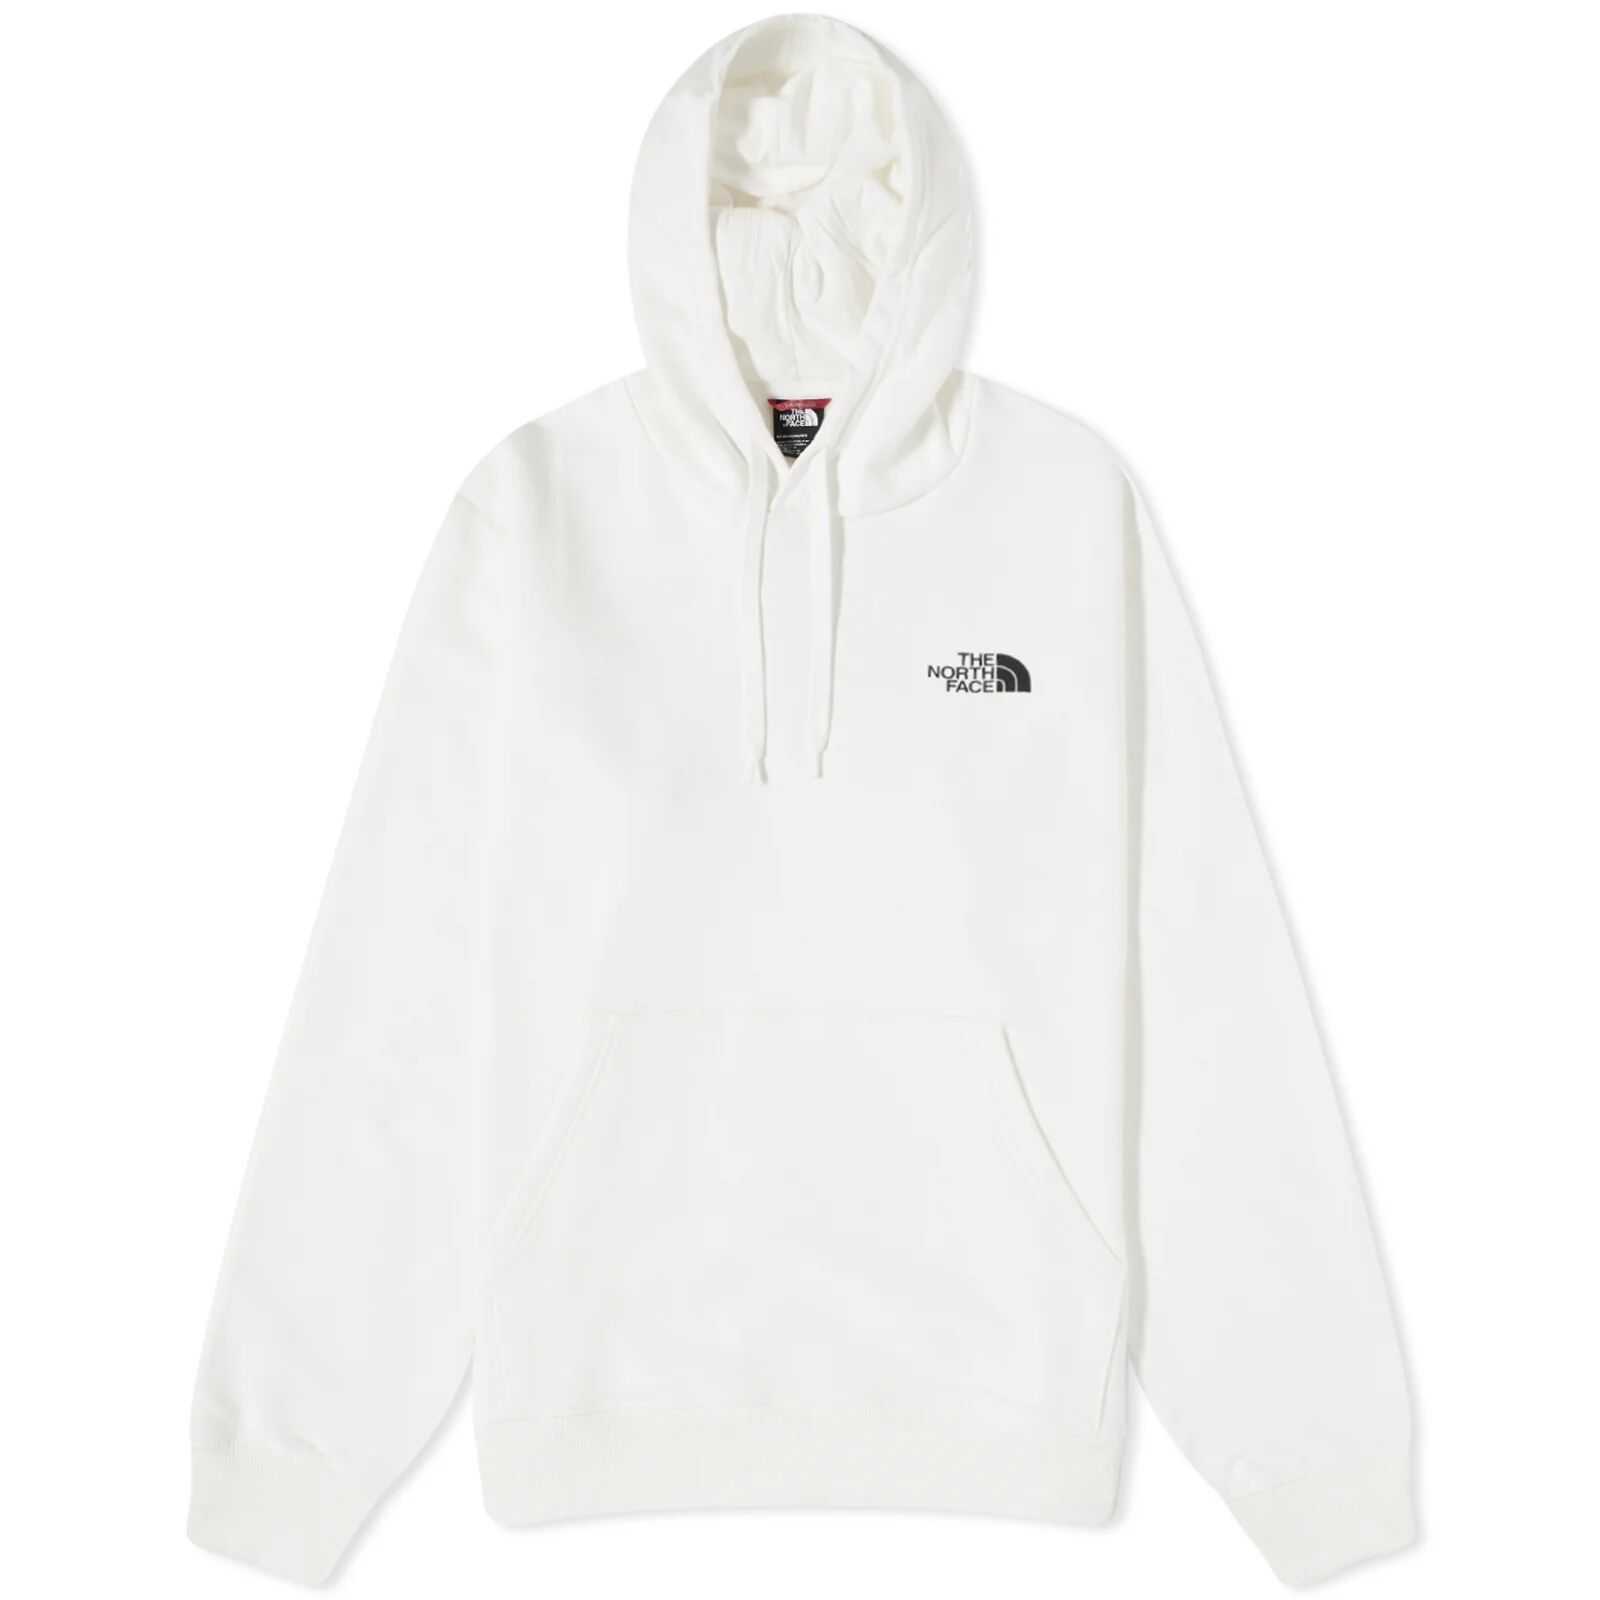 The North Face Men's Seasonal Graphic Hoodie in Gardenia White/Brandy Brown, Size X-Large